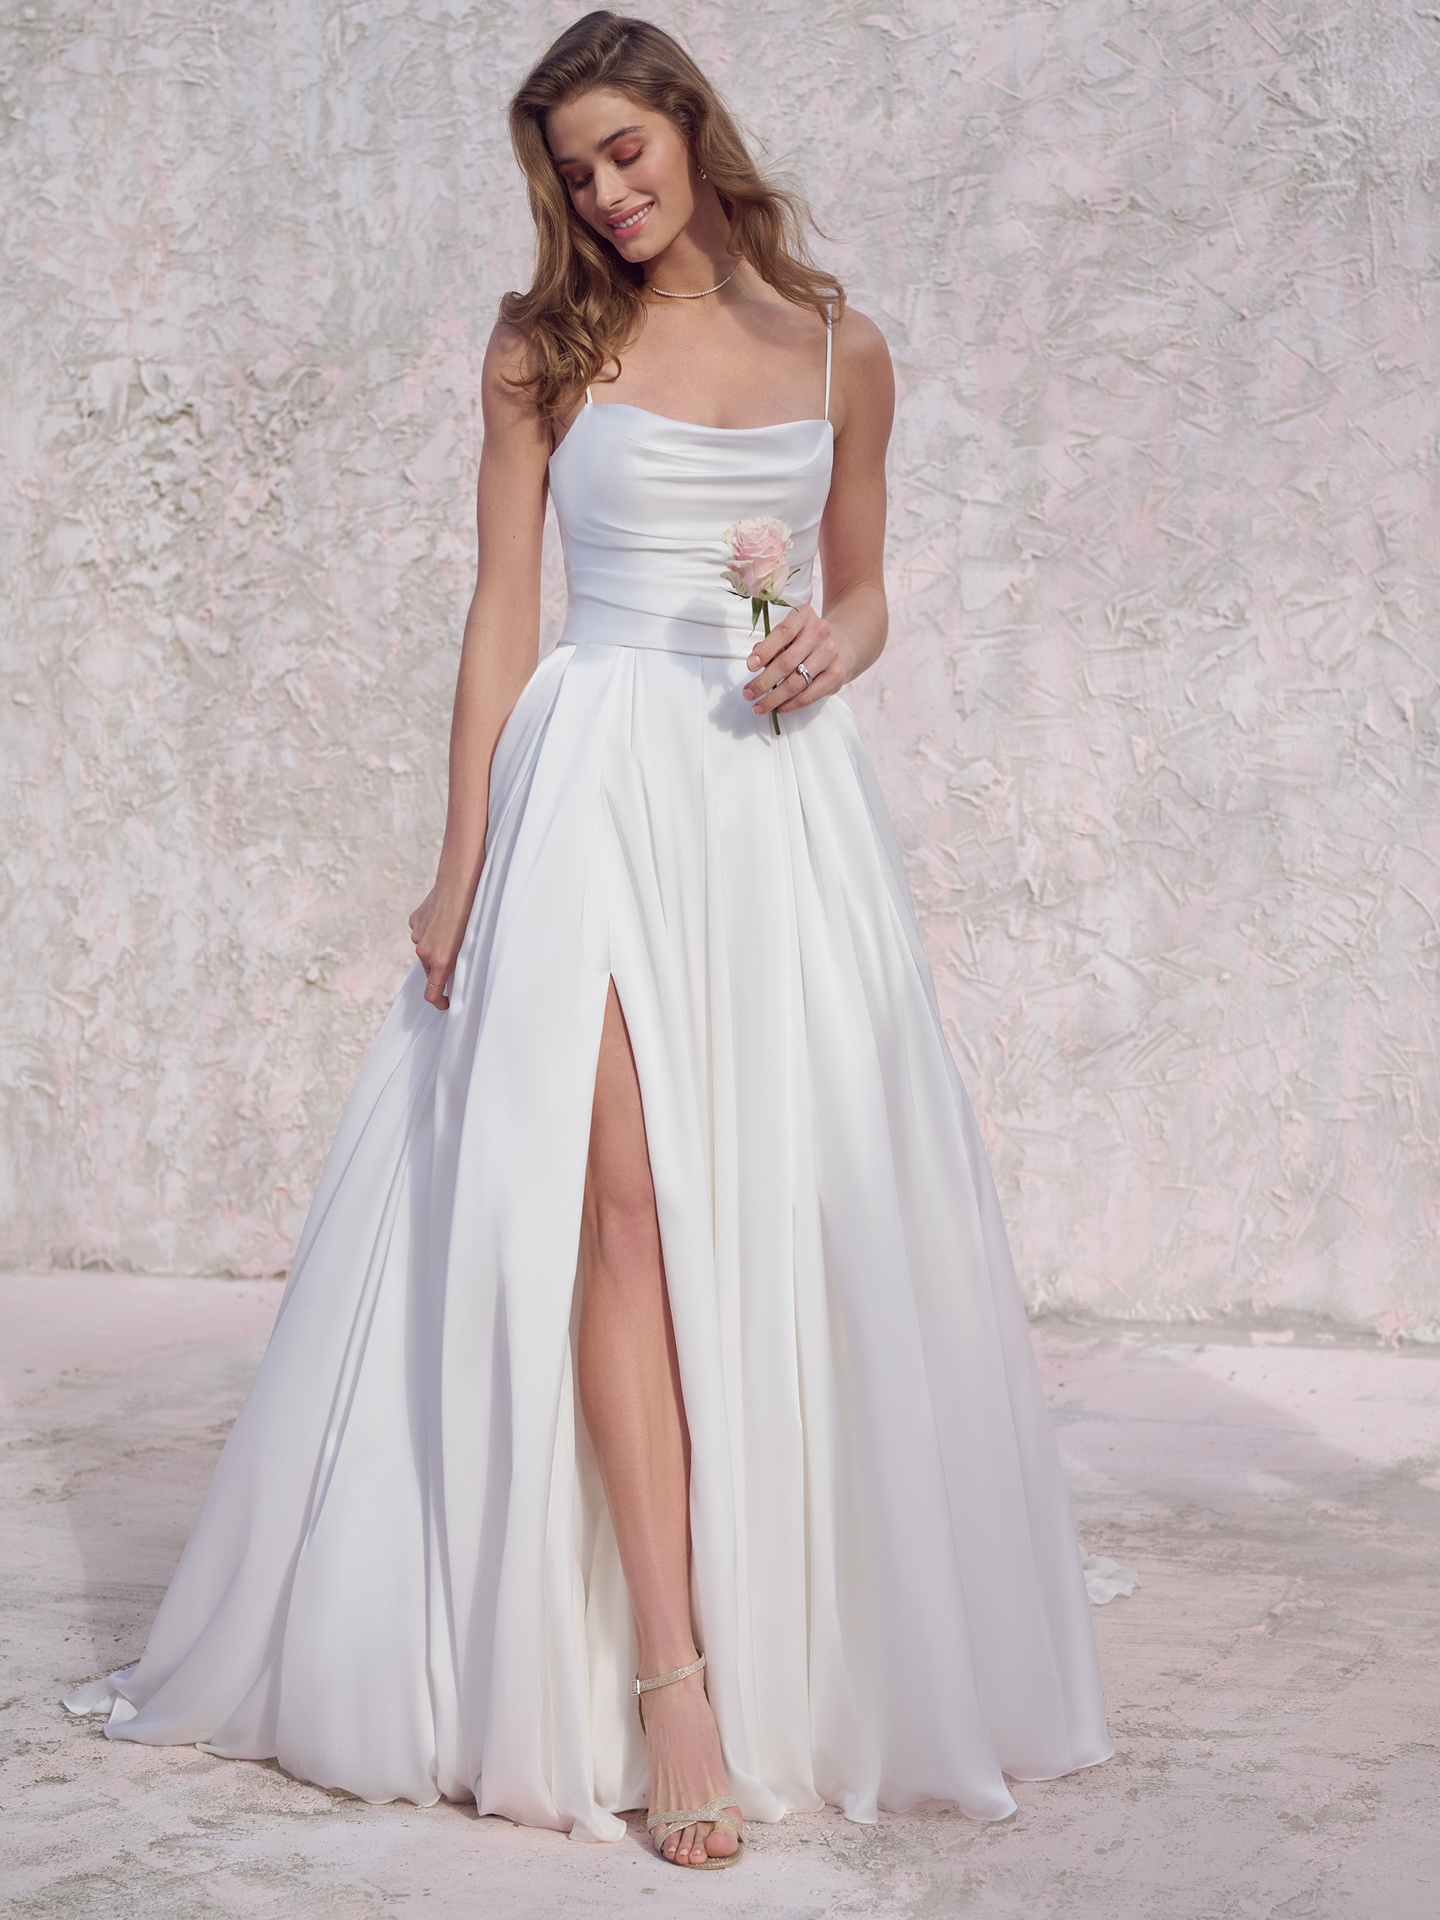 Bride In Satin A-Line Wedding Dress Caleld Scarlet By Maggie Sottero